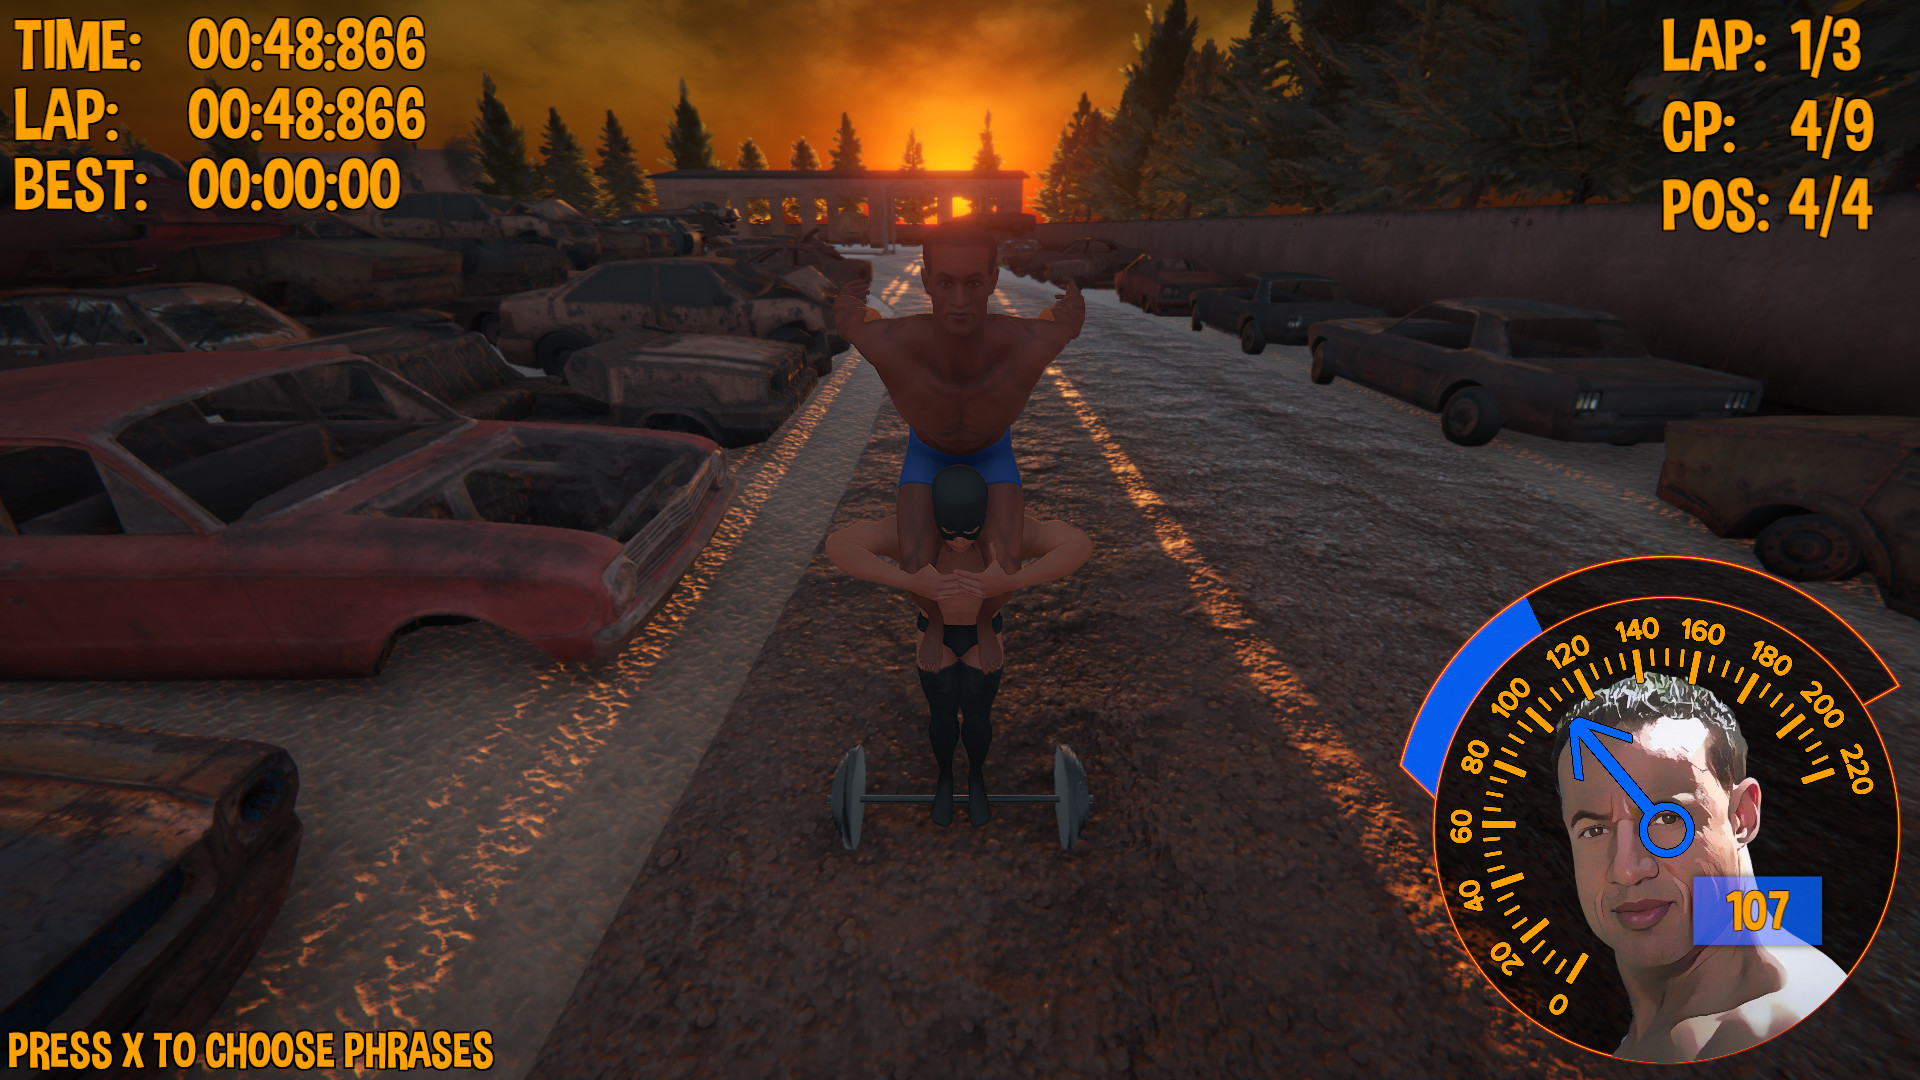 Ultimate Muscle Roller Championship Steam CD Key, $3.38